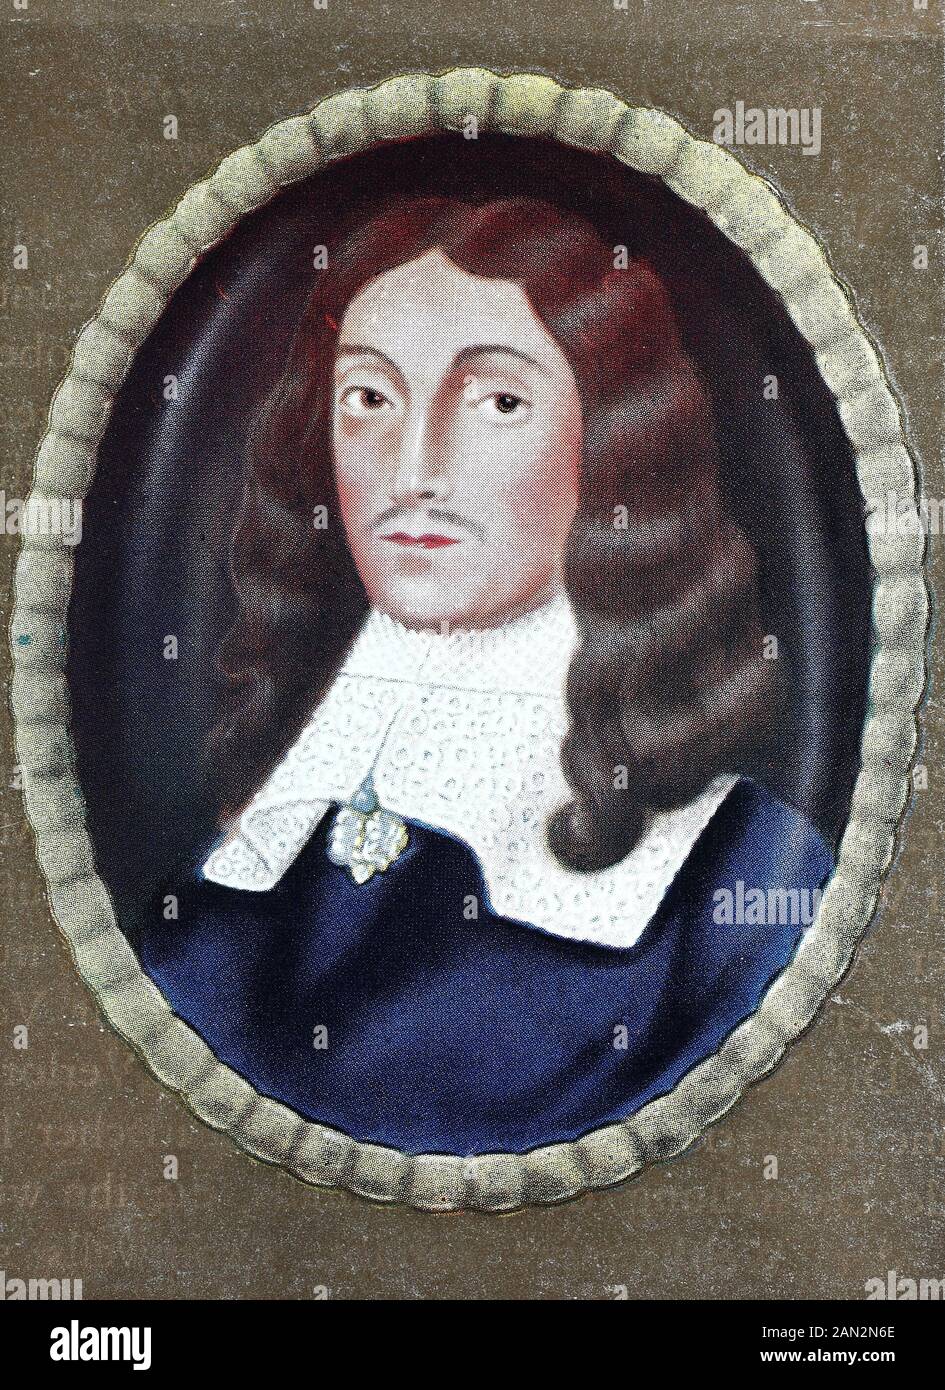 John Milton, 9 December 1608 – 8 November 1674, was an English poet, polemicist, man of letters, and civil servant for the Commonwealth of England under its Council of State and later under Oliver Cromwell.,   /  John Milton, 9. Dezember 1608 - 8. November 1674, war ein englischer Dichter, Polemiker, Schriftsteller und Beamter des Commonwealth of England unter seinem Staatsrat und später unter Oliver Cromwell, Historisch, digital improved reproduction of an original from the 19th century / digitale Reproduktion einer Originalvorlage aus dem 19. Jahrhundert Stock Photo